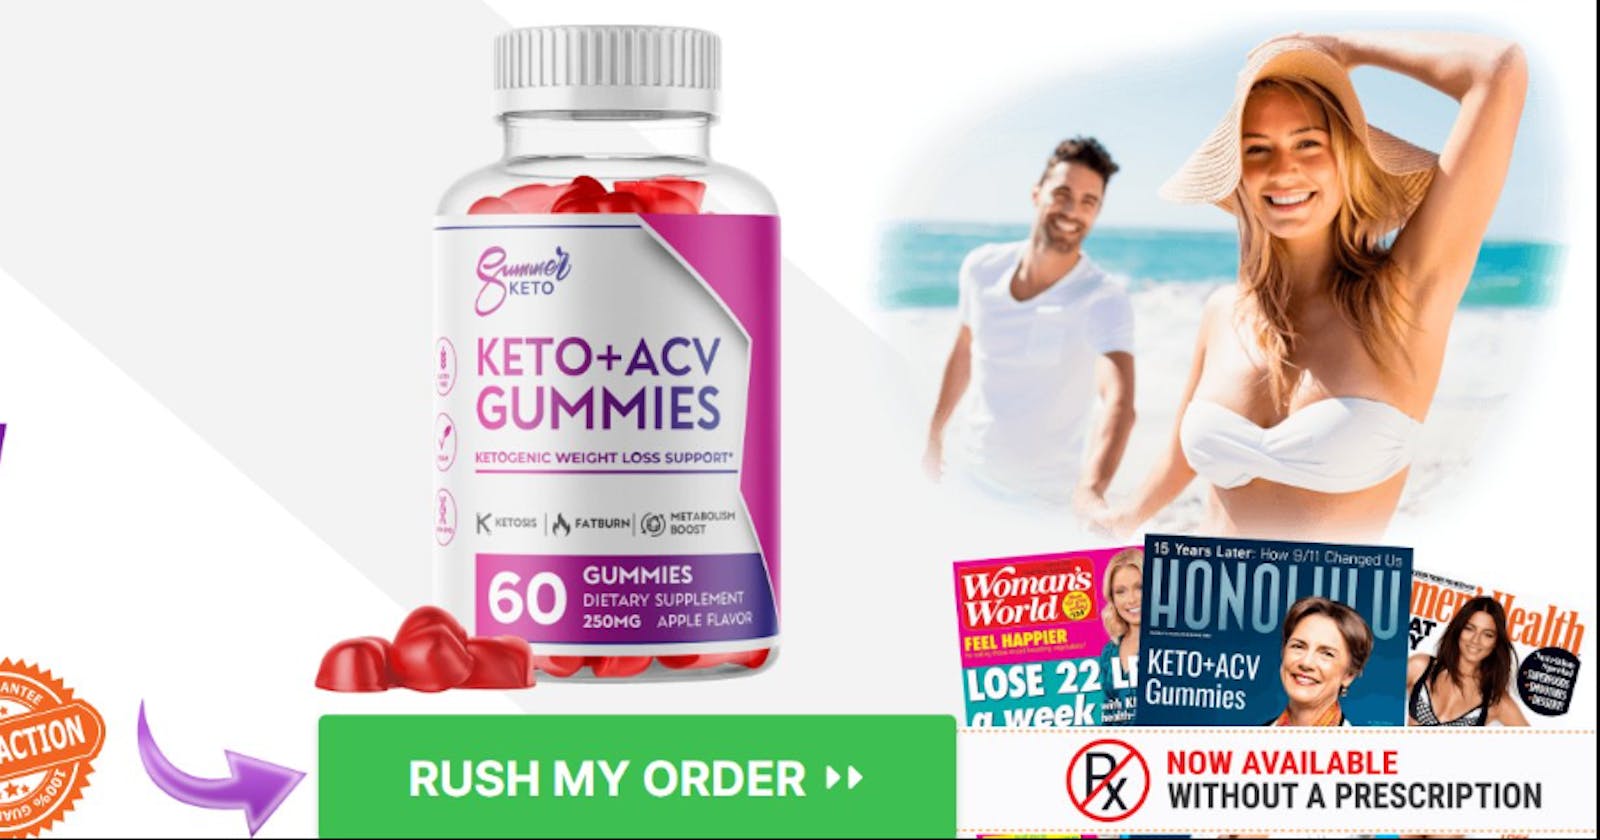 Summer Keto + ACV Gummies UK Excellent Effective Of Weight Reduction & weight Loss Formula?